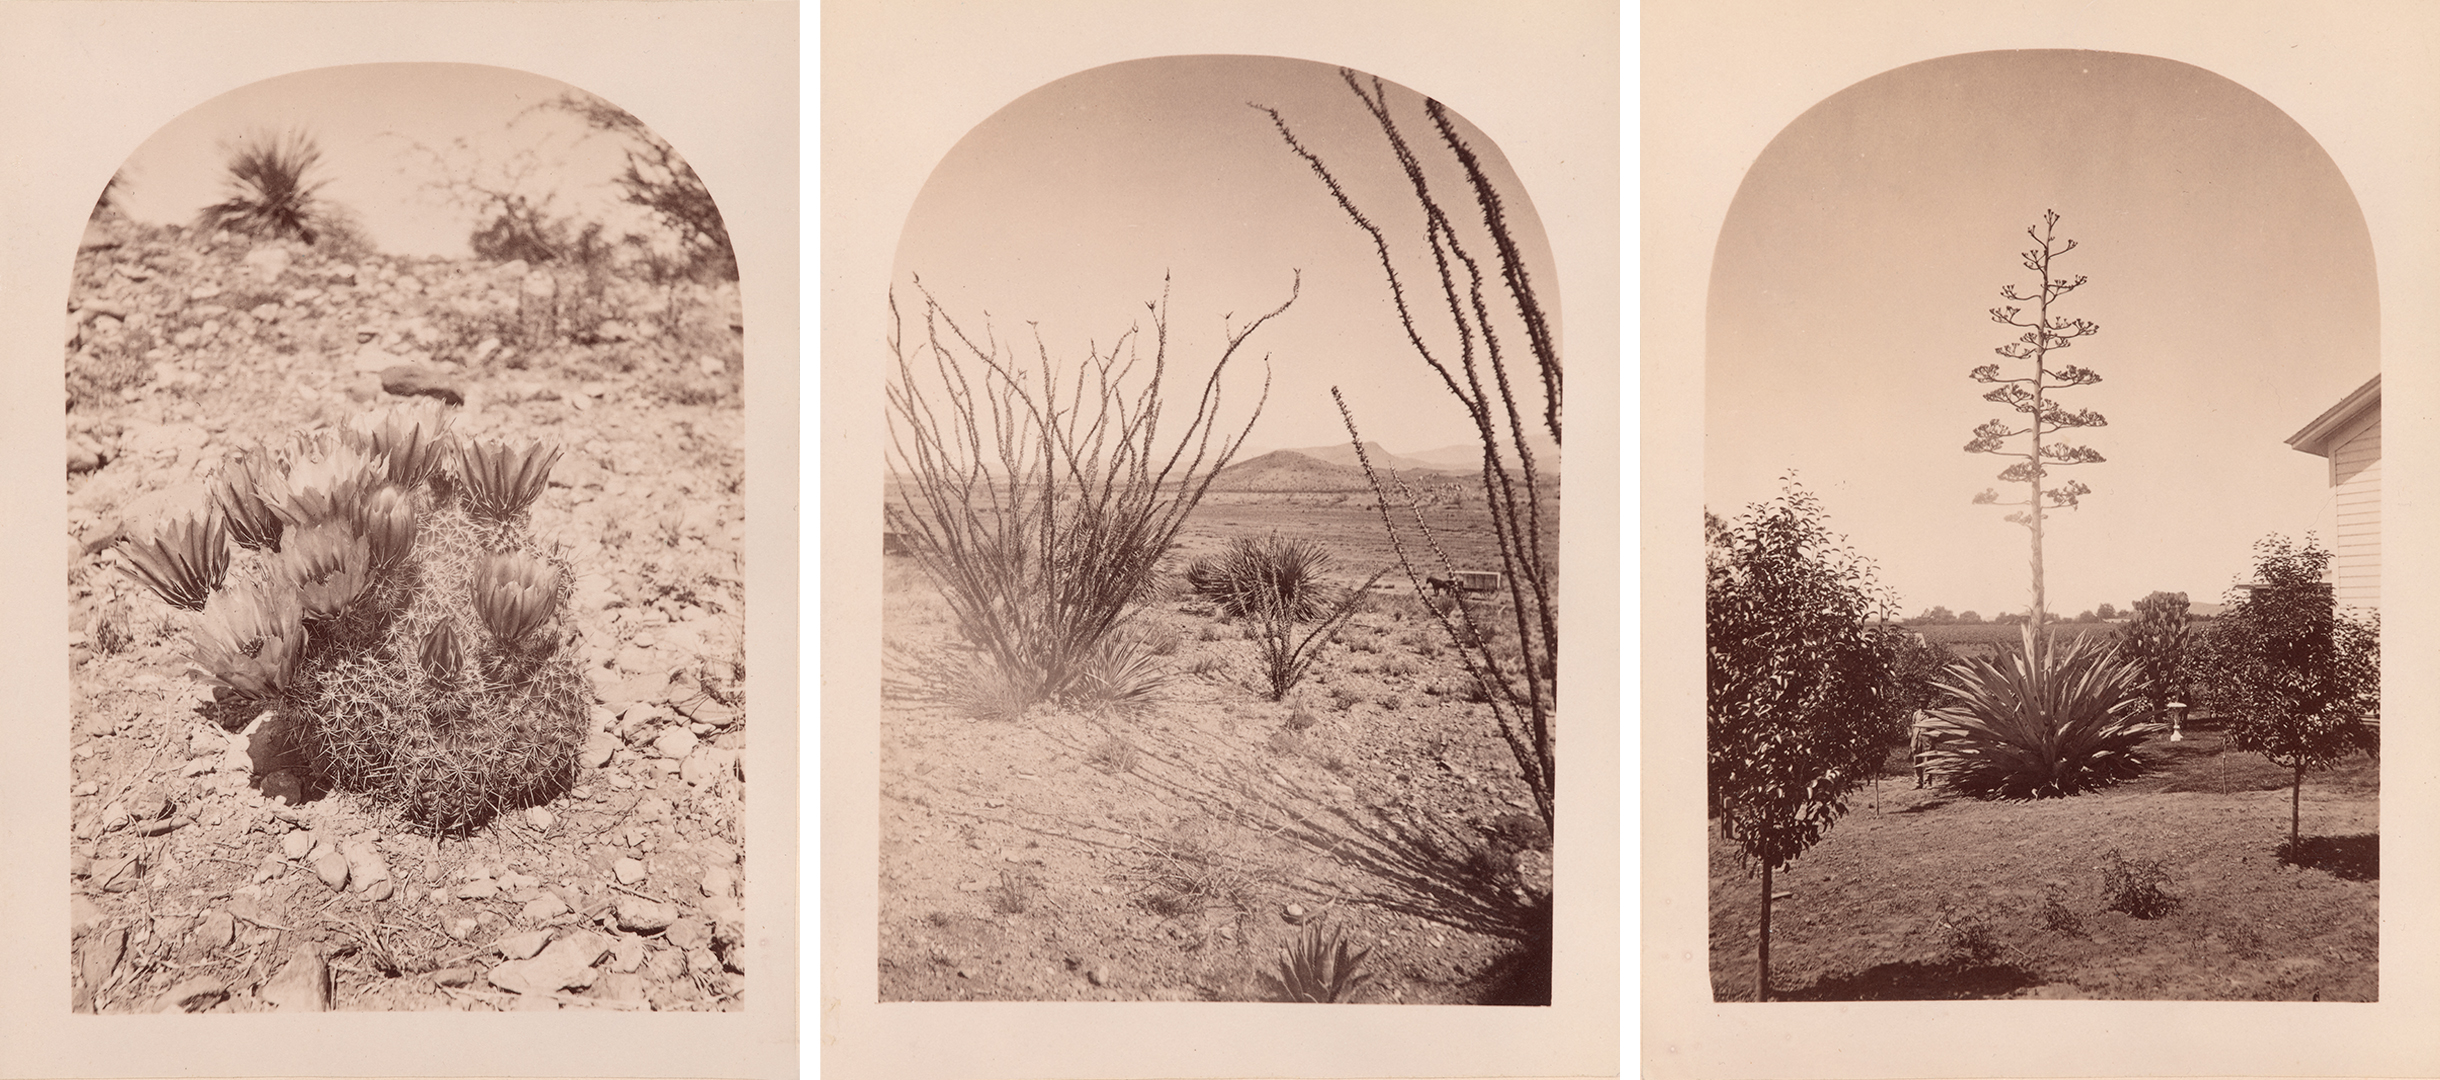 Three sepia-tone images of desert landscapes in an arch-shaped frame, individually featuring cactus, ocotillo, and agave.